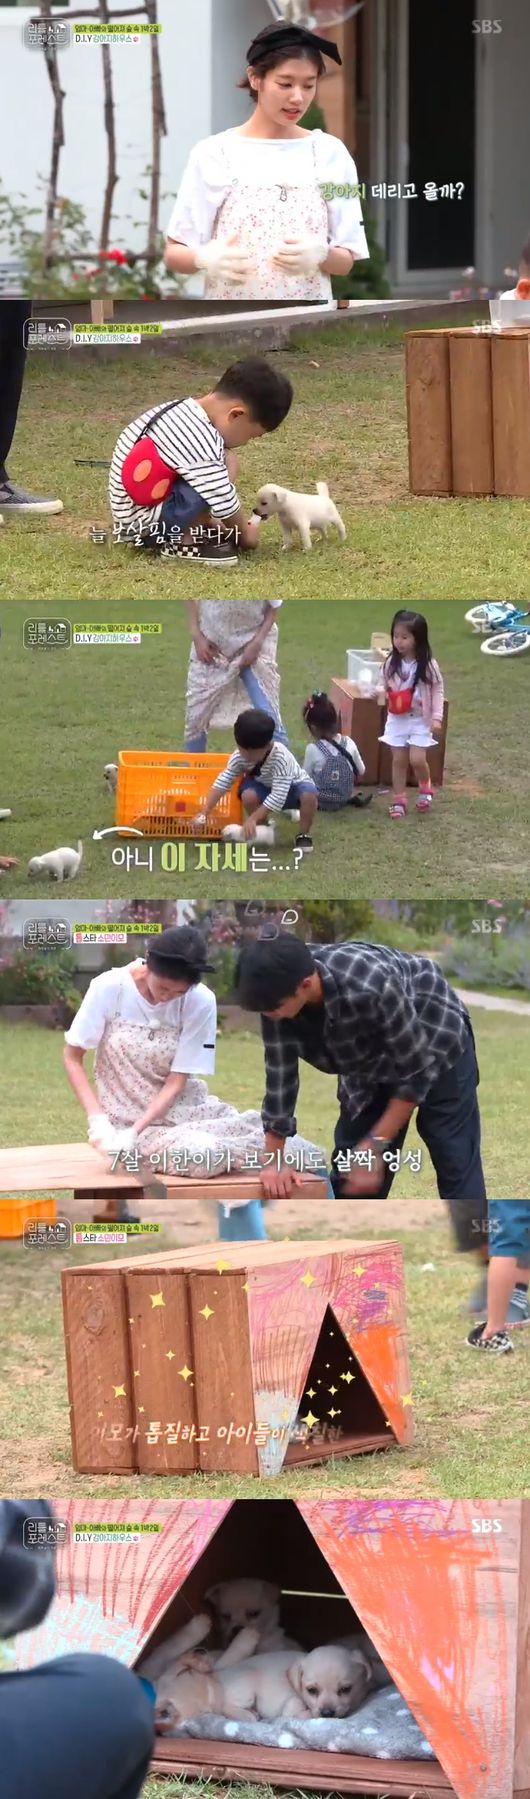 Lee Seo-jin x Lee Seung-gi x Park Na-rae x Jung So-min took care of Little.In the SBS Wolhwa entertainment Little Forest broadcasted on the last 30 days, four people were shown to show special events to children.On this day, Lee Seung-gi said, I want to enjoy a lot of things I can do in the forest. He planned to make a swing and completed the swing with the support of Lee Han.Before burning the children, Lee Seung-gi first test-drived and confirmed his strength, and Lee Han-i was the first to board.When Jung So-min came to see the news that the swing was completed, he boarded for the second time. Jung So-min also enjoyed the thrill, saying, Its so fun.However, Little was scared. Lee Seo-jin made a two-line swing saying, The outer line is too scary for children.Jung So-min took care of the dogs living next door with Little Lee, who told Little Lee, You have to take good care of the dogs because they are young.After that, Jung So-min started to take a saw and started something. Lee Seung-gi and Park Na-rae, who saw this, said, It is the first sawing that makes the entrance of the dog House.Lee Seung-gi assisted Jung So-min in his work as an assistant.Jung So-min was sore and successful in sawing, and a pretty dog House was created. Little people took out the puppy and moved it to the House and gave it milk.Then, when the puppy pooped, he cleaned the puppies by cleaning the poop himself.Jung So-min, who watched this, said, The children are also fragile John Jan. ... I was warmed up to see them protecting weaker puppies than themselves.Lee Seo-jin, Lee Seung-gi, Park Na-rae, and Jung So-min gathered to talk. Park Na-rae said, Everyone has suffered today.I do not think I should do a reunion. I want to see my Friend. Lets go. So, Jung So-min also said, All my aunts uncles heart will be like that. I want to finish with a small reunion feeling that all the Friends who came to Little Forest gather together.I hope its a gift for the kids, Park said, joking, and at the end of the day, well call our mom and let her take our luggage.Lee Seo-jin laughed, saying, My mother is sick and I can not walk well. Park said that she prepared a large Soap Bubbles show for Little.Park Na-rae said, I saw it at the kids cafe and it was really huge. Everyone shouted like WaaaaaaaaaaaaaaaaaaaaaaaaaaaaaaaaaaaaaaaaaaaaaaaaaaaaaaaaaaaaaaaaaaaaaaaThen he was delighted at the thought that Little would like.Little Forest broadcast screen capture